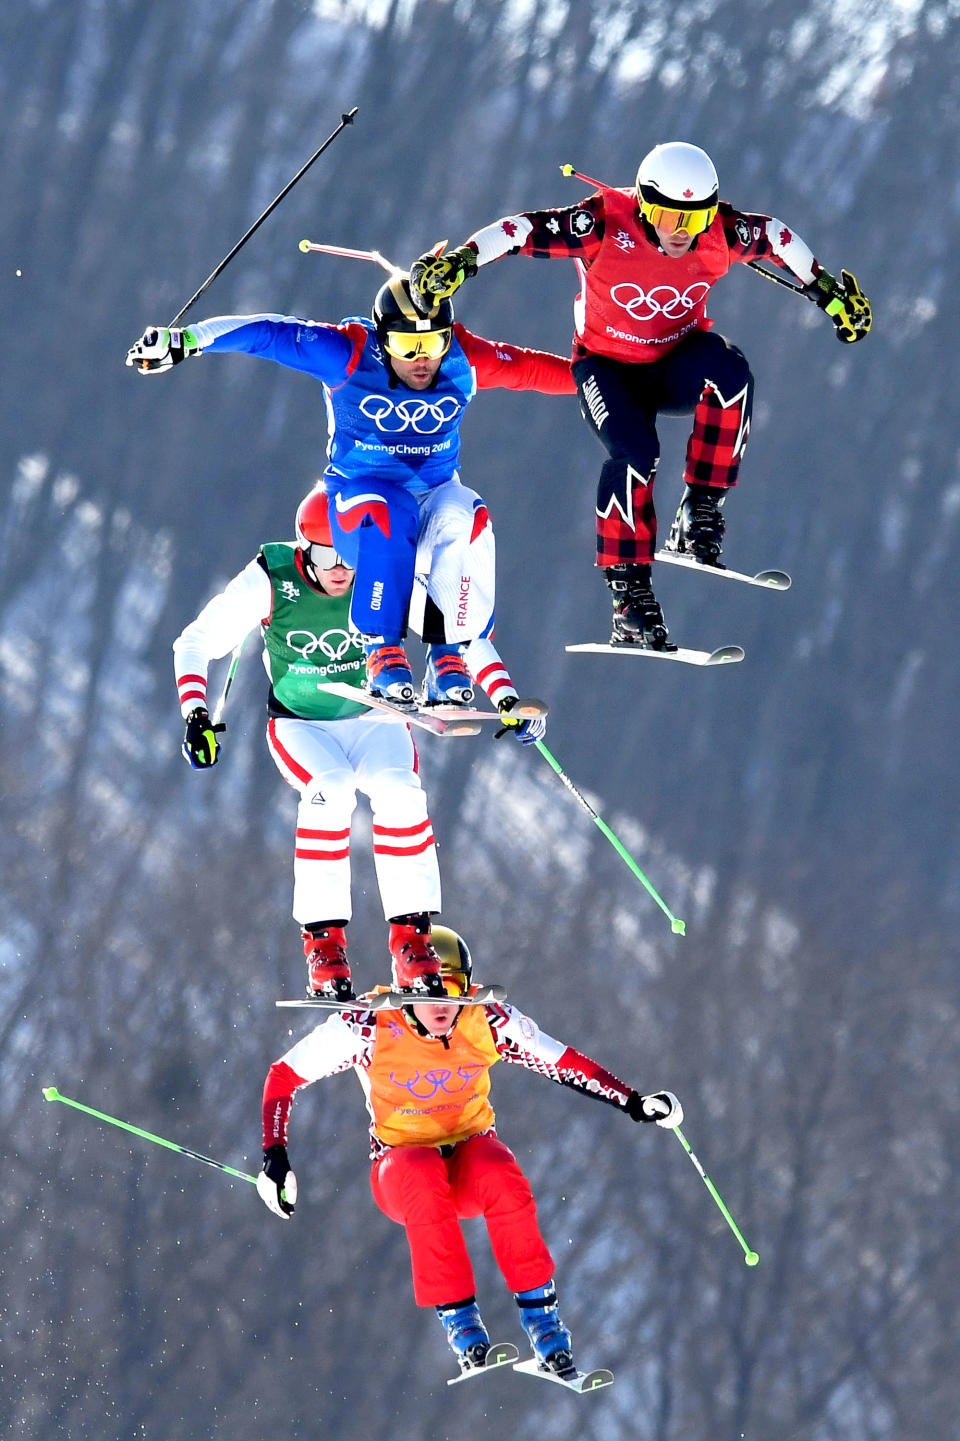 <p>Canada’s Kevin Drury, France’s Arnaud Bovolenta, OAR’s Semem Denishchikov, and Austria’s Robert Winkler compete in the Freestyle Skiing Men’s Ski Cross Quarterfinals on day 12 of the PyeongChang 2018 Winter Olympic Games in Pyeongchang, South Korea, February 21, 2018.<br> (Photo by Quinn Rooney/Getty Images) </p>